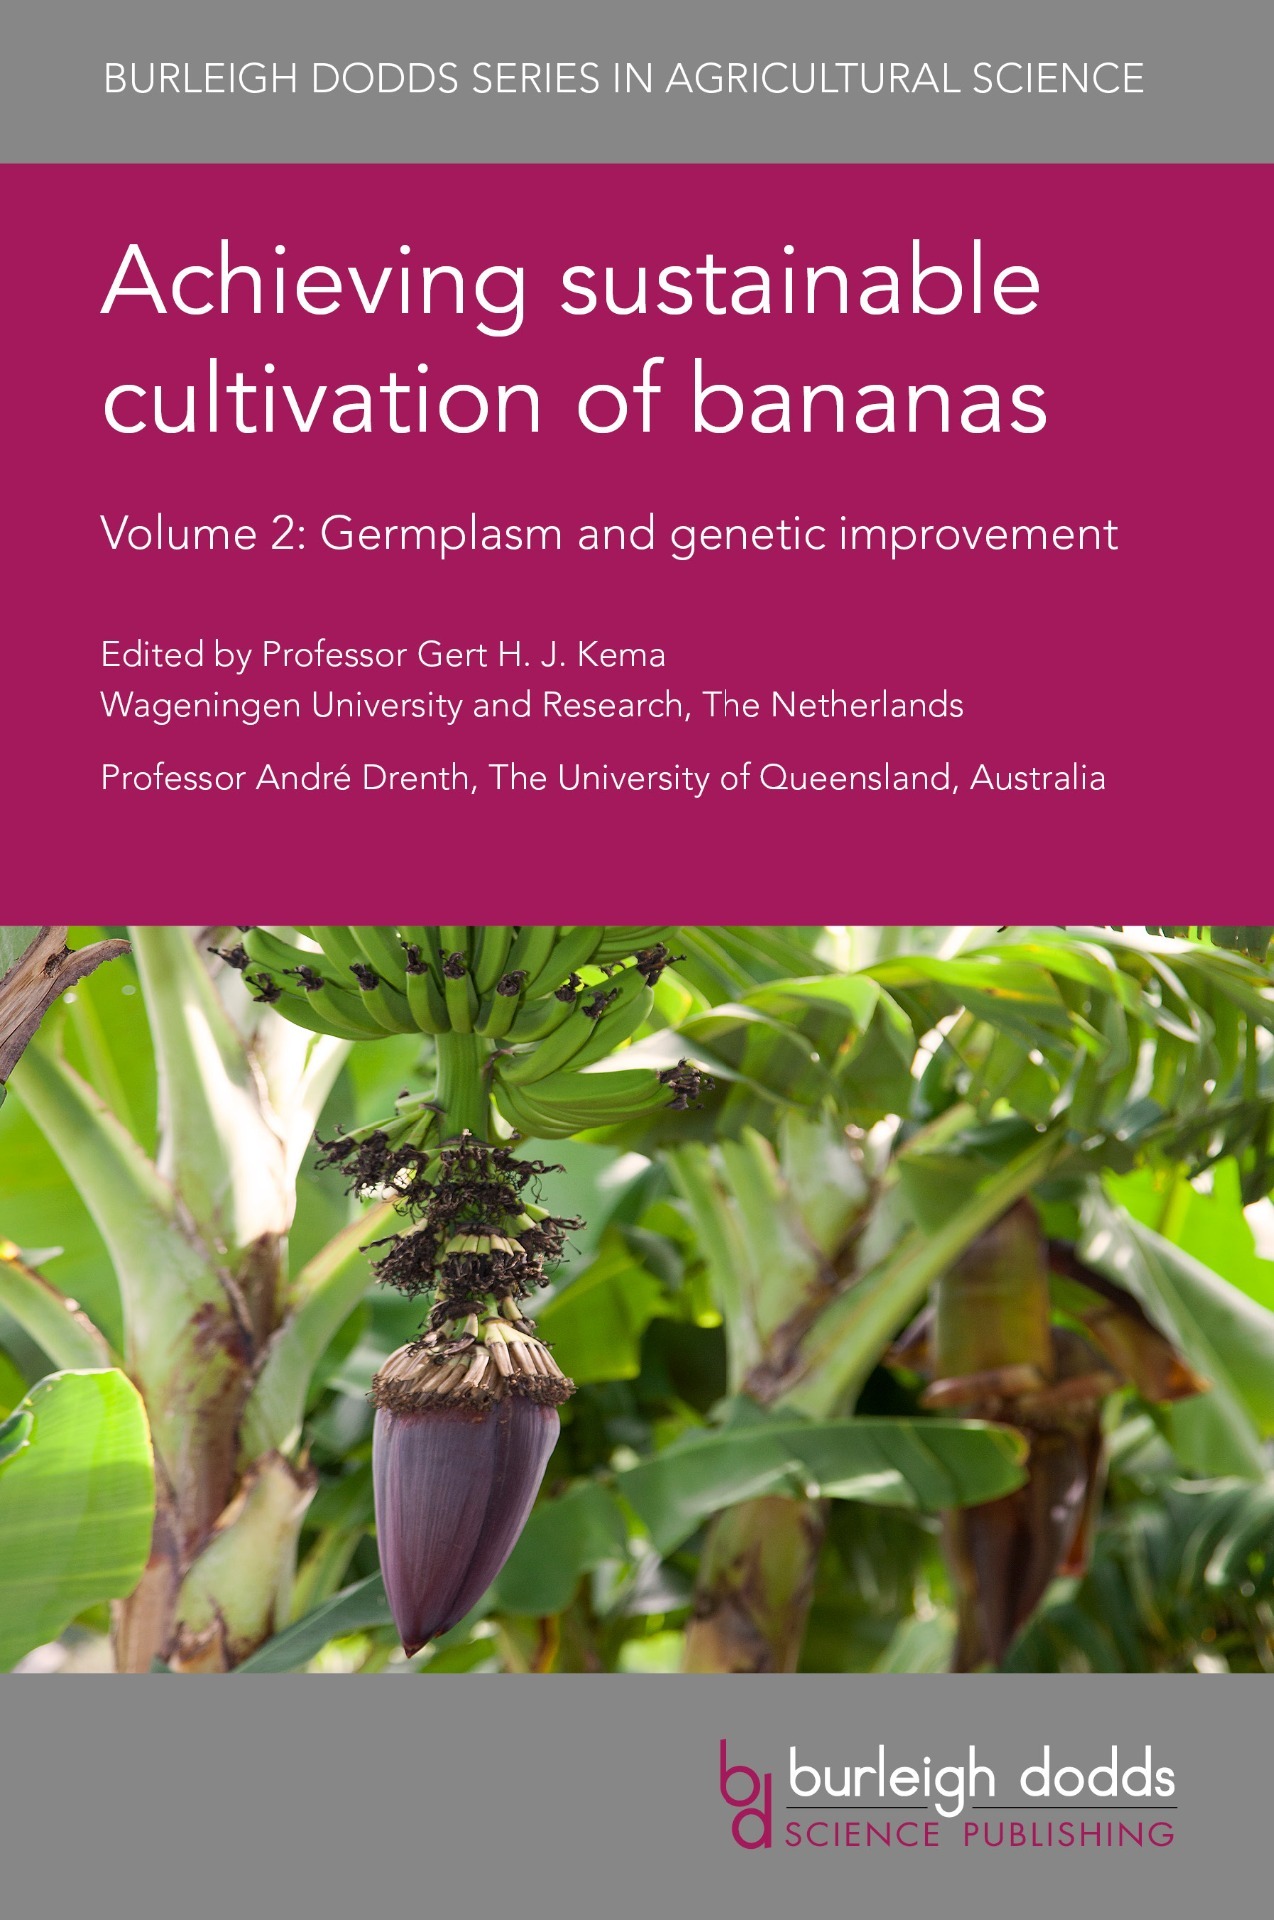 Achieving sustainable cultivation of bananas Volume 2 Germplasm and genetic improvement